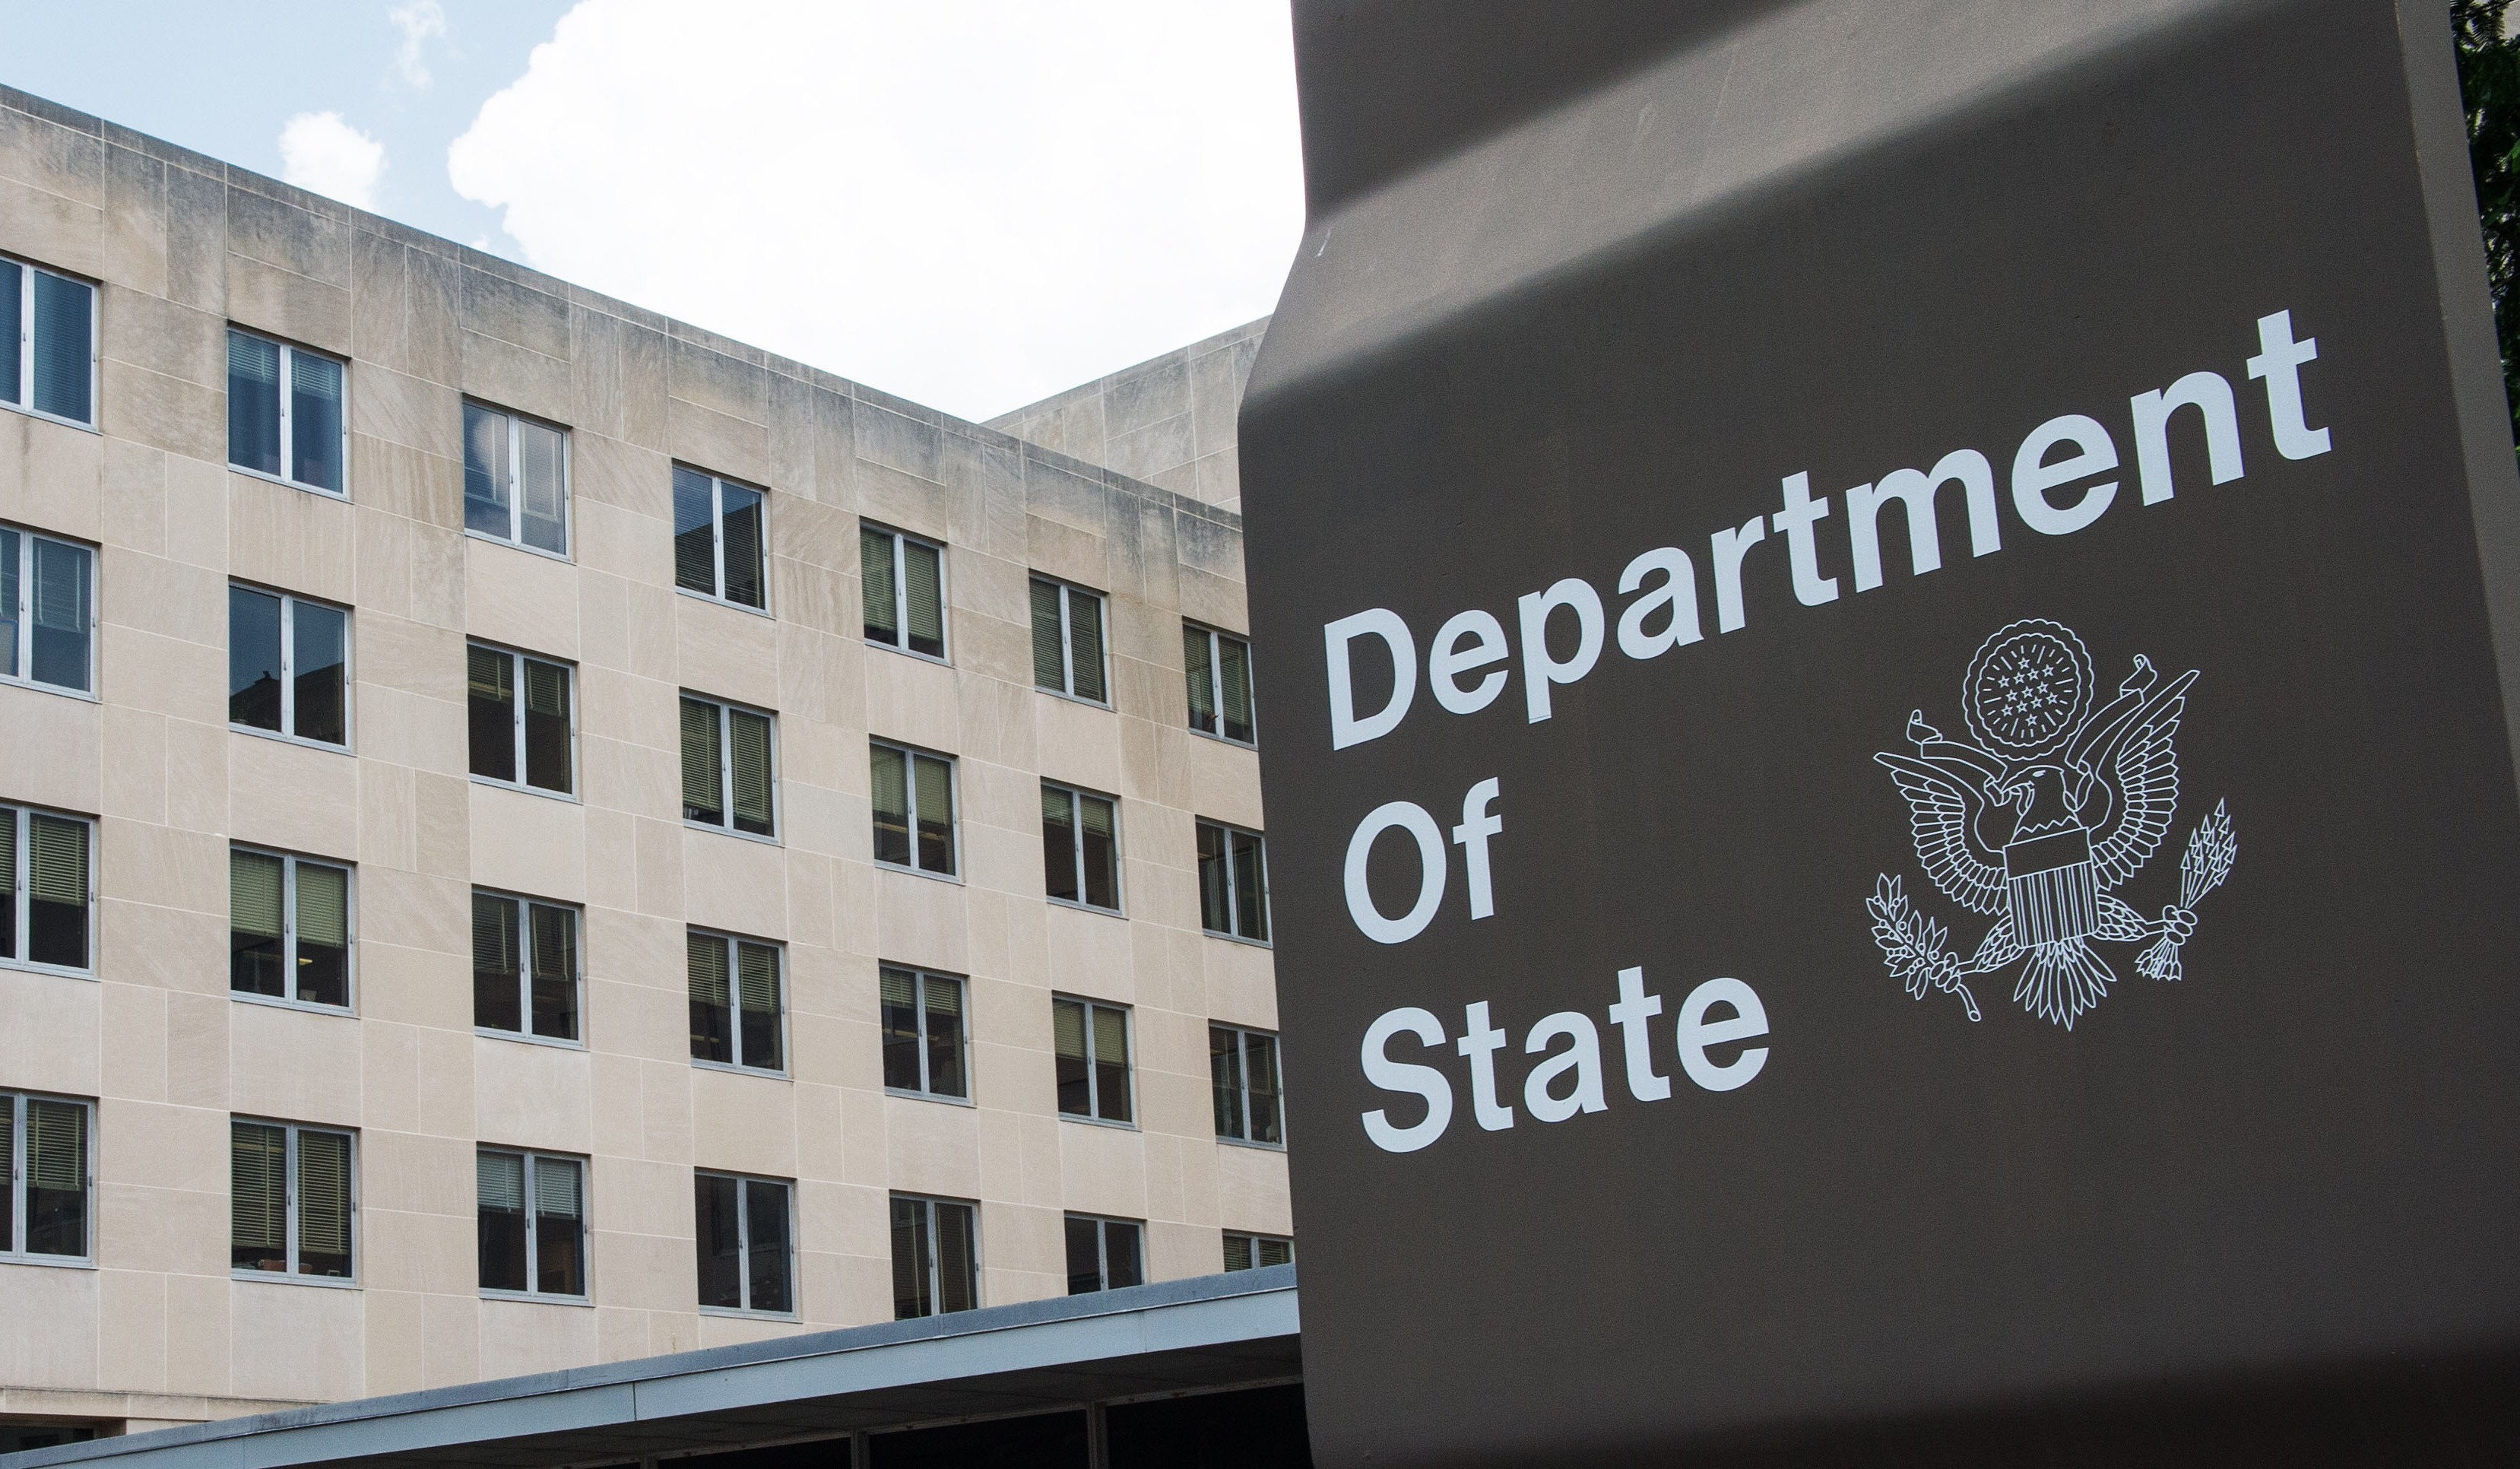 Total human rights abuses in Azerbaijan, US State Department’s Country report